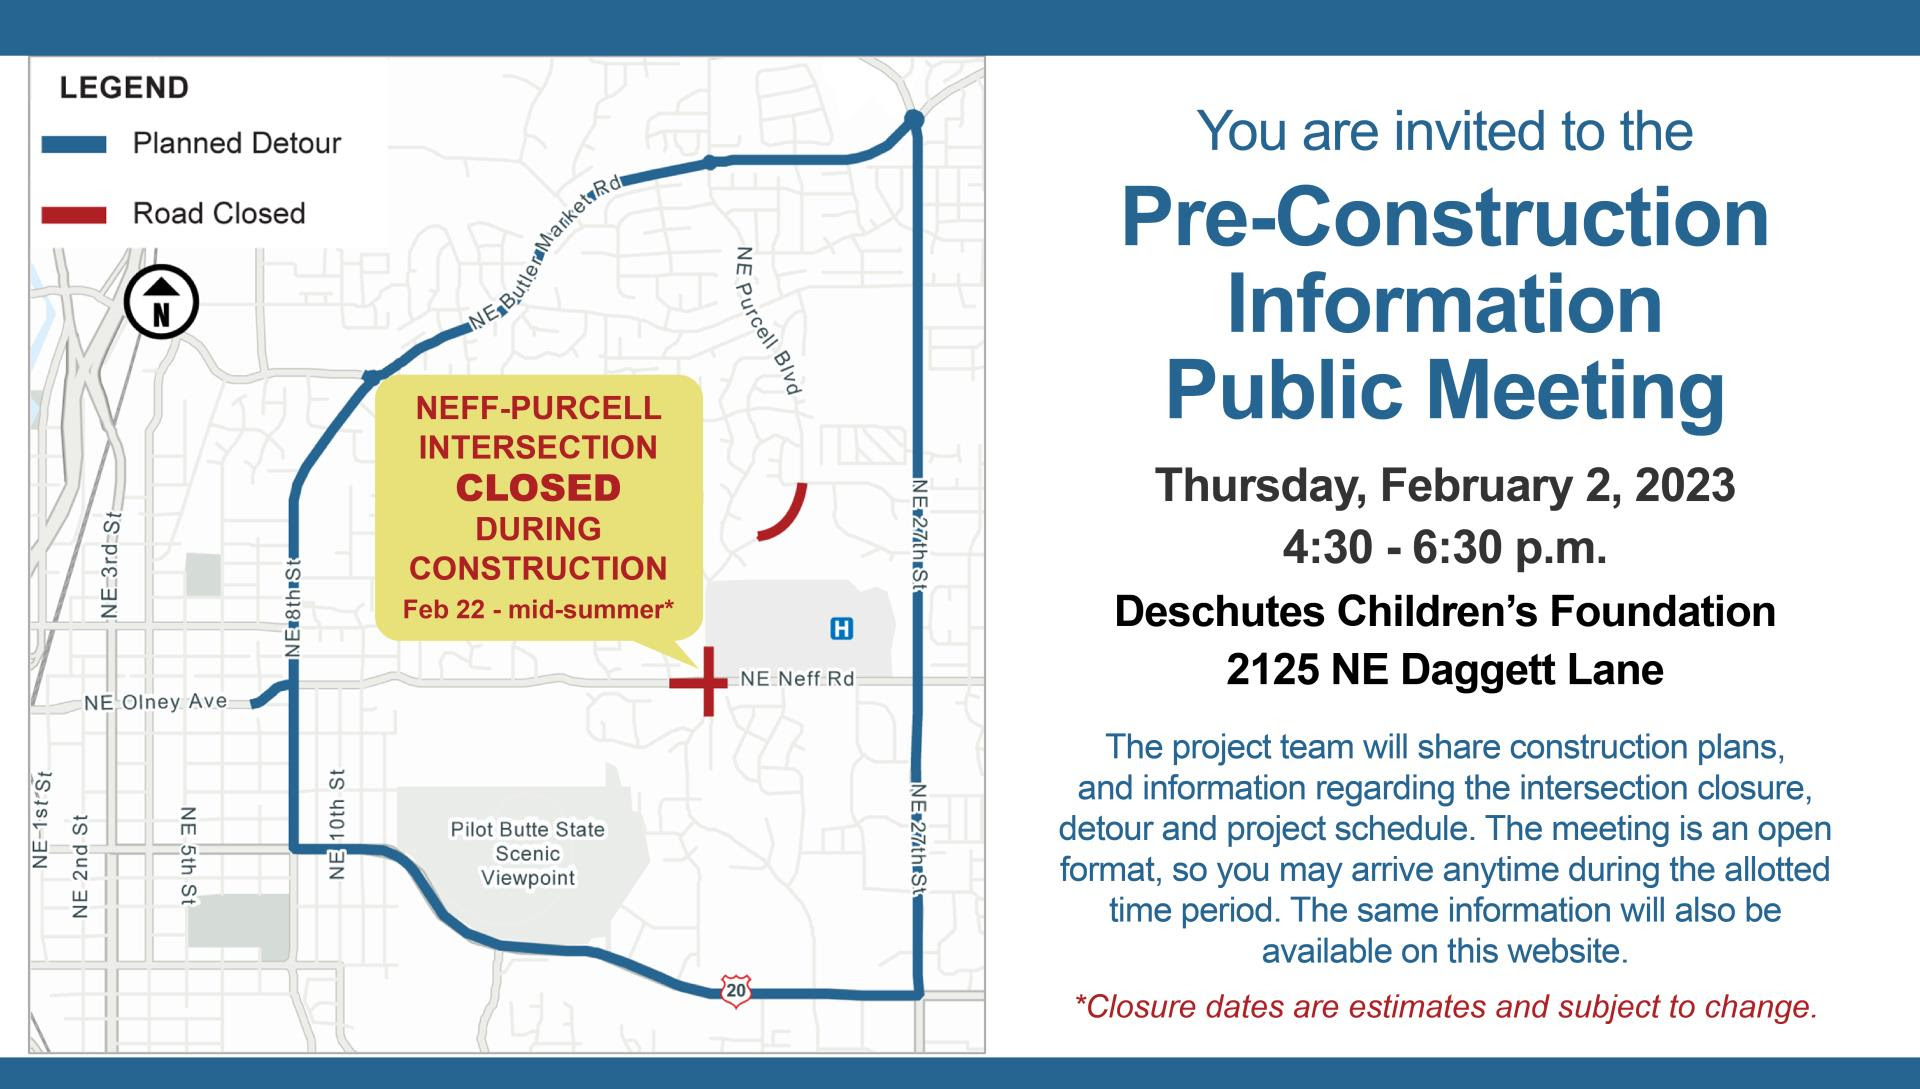 neff and purcell intersection will be closed during construction February 22 through mid-summer 2023. 